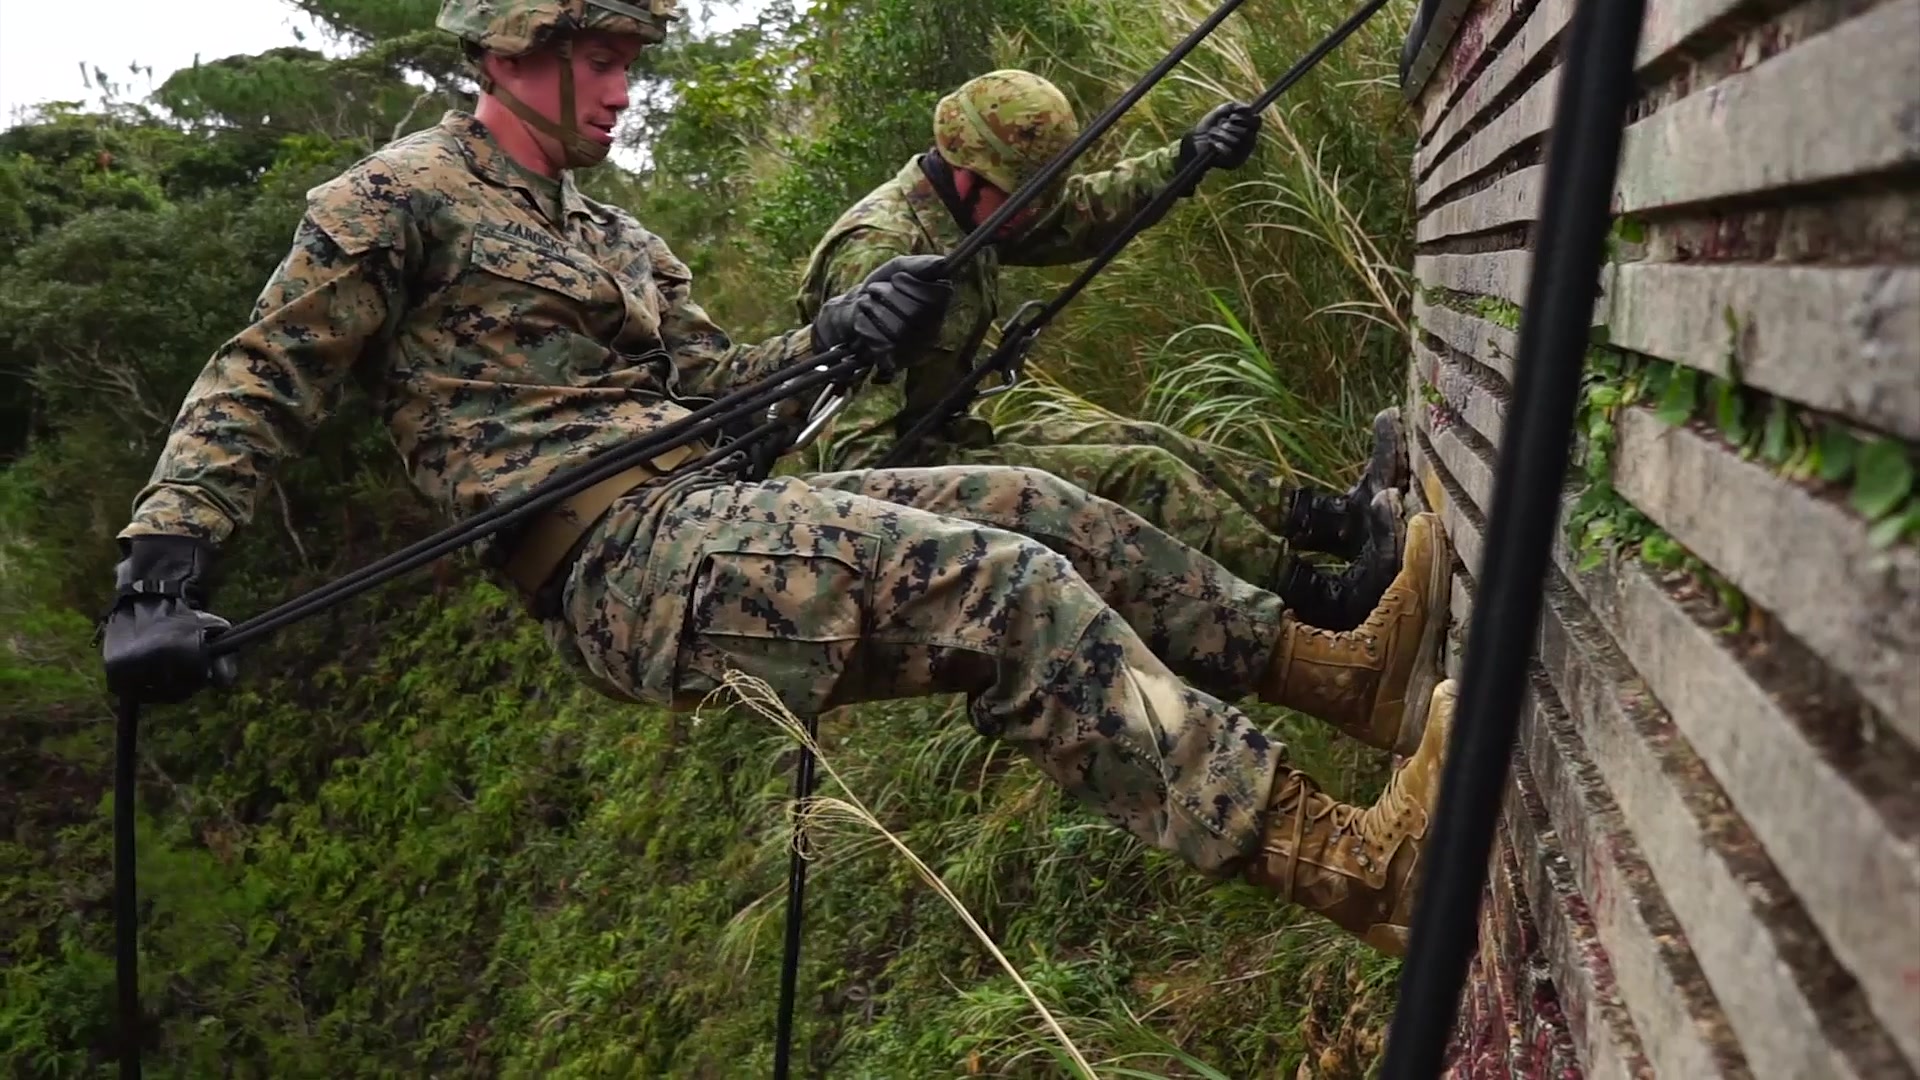 U.S. Marines train alongside members of the Japanese Ground Self-Defense Force during the Jungle Leaders Course on Camp Gonsalves, Okinawa, Japan, Jan. 15, 2021. JLC trains Marines in jungle survival skills, tactical rope suspension techniques, and jungle warfare tactics, building a lethal force capable of conducting operations throughout the Indo-Pacific region. (U.S. Marine Corps video by Lance Cpl. Hassanen Attabi)